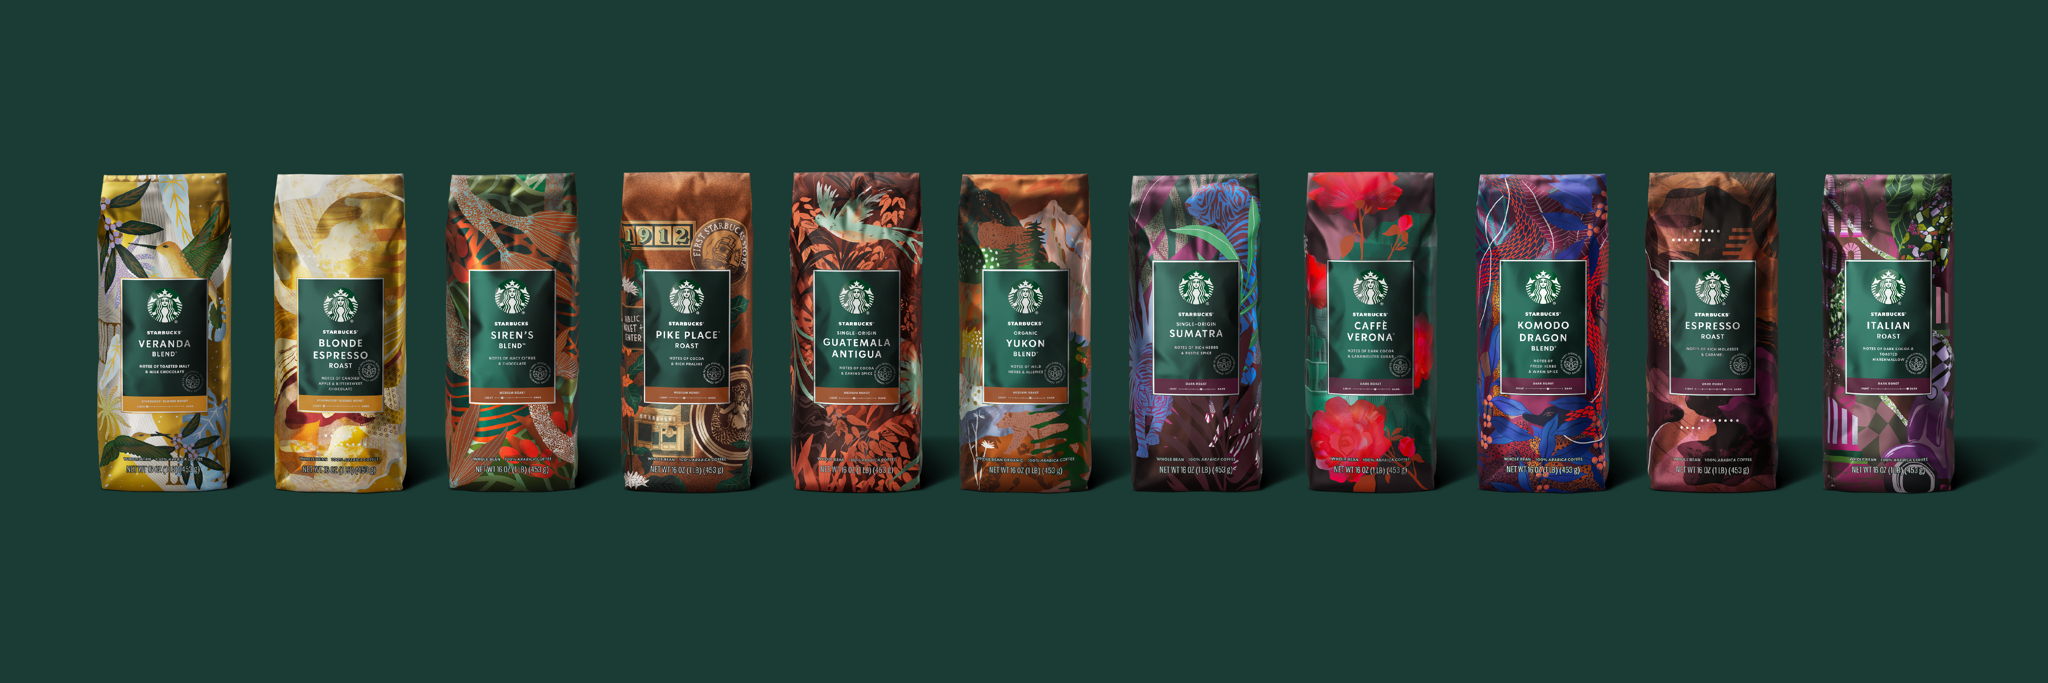 Starbucks Coffee Packaging Redesign_All Up.png